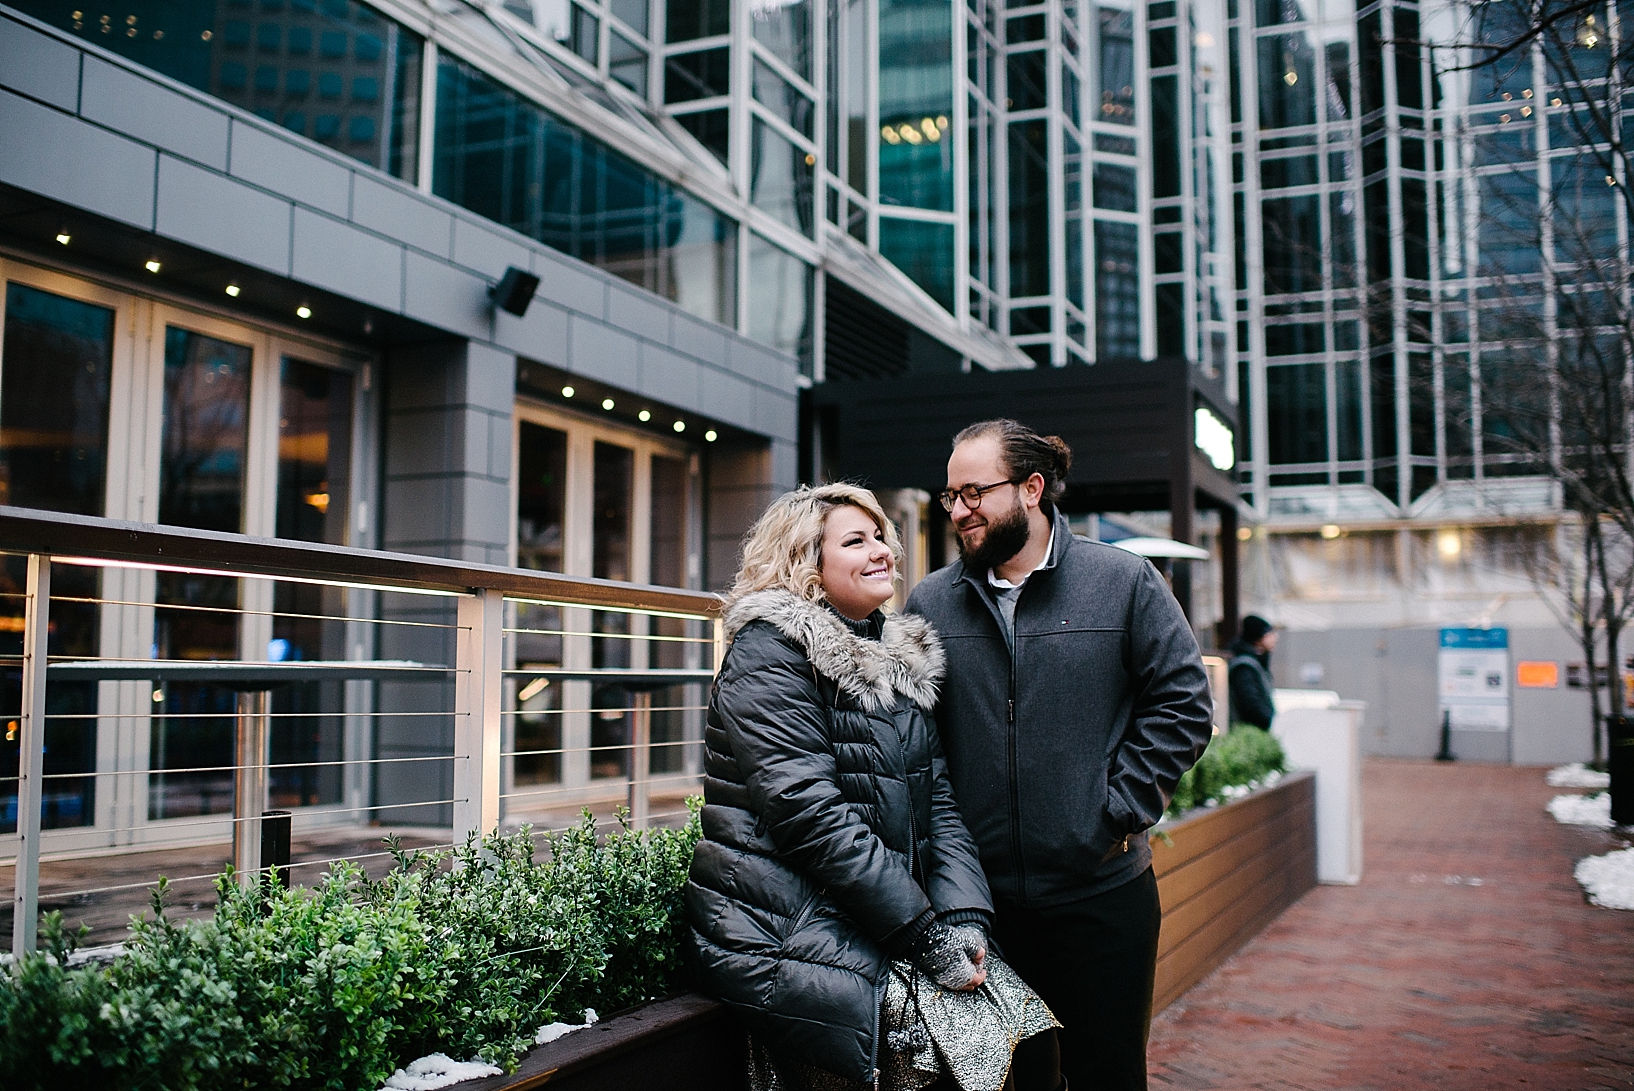 blonde woman wearing puffy winter coat sitting on ledge looking up at fiance with man bun